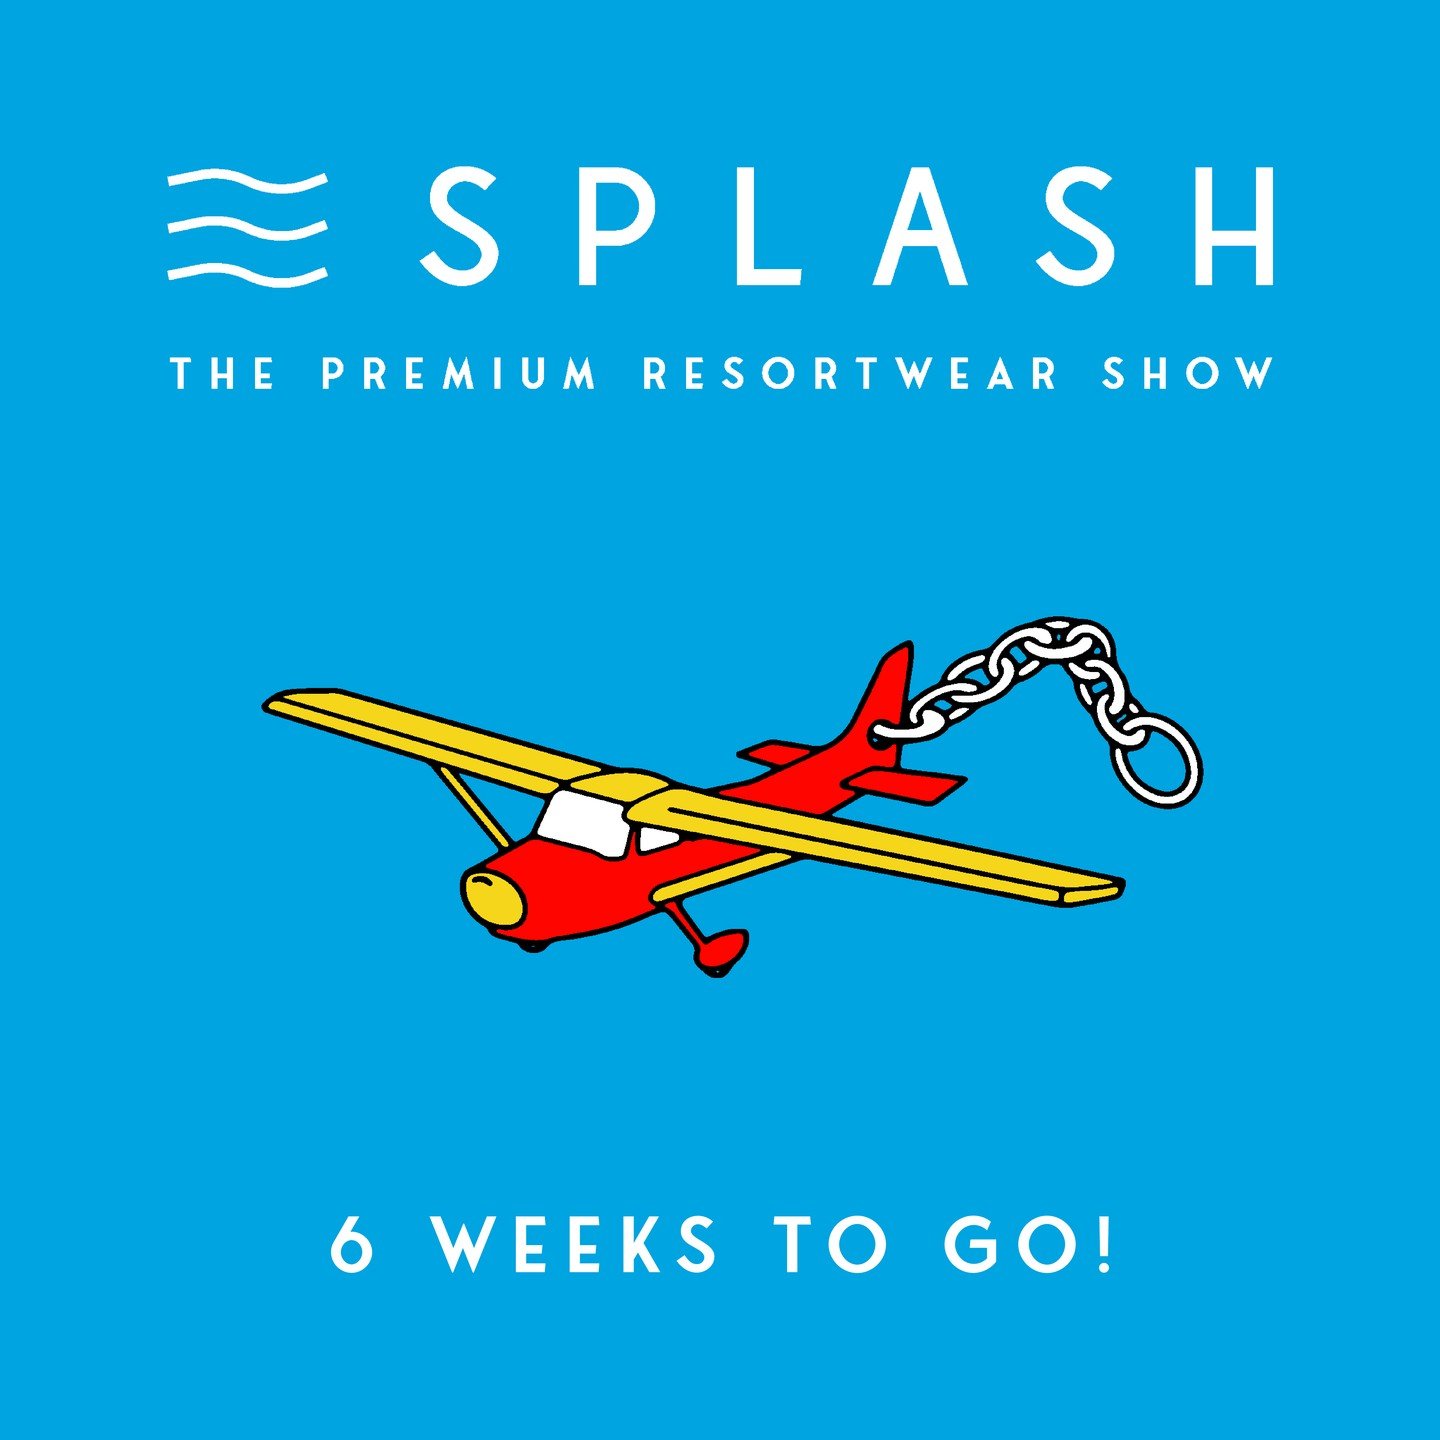 6 weeks to go until we open the doors for Splash Paris!

Ensure you are registered to attend by clicking the link in our bio. Don&rsquo;t miss out!

#splash#paris#parisshowroom#swim#swimwear#resort#resortwear#tradeshow